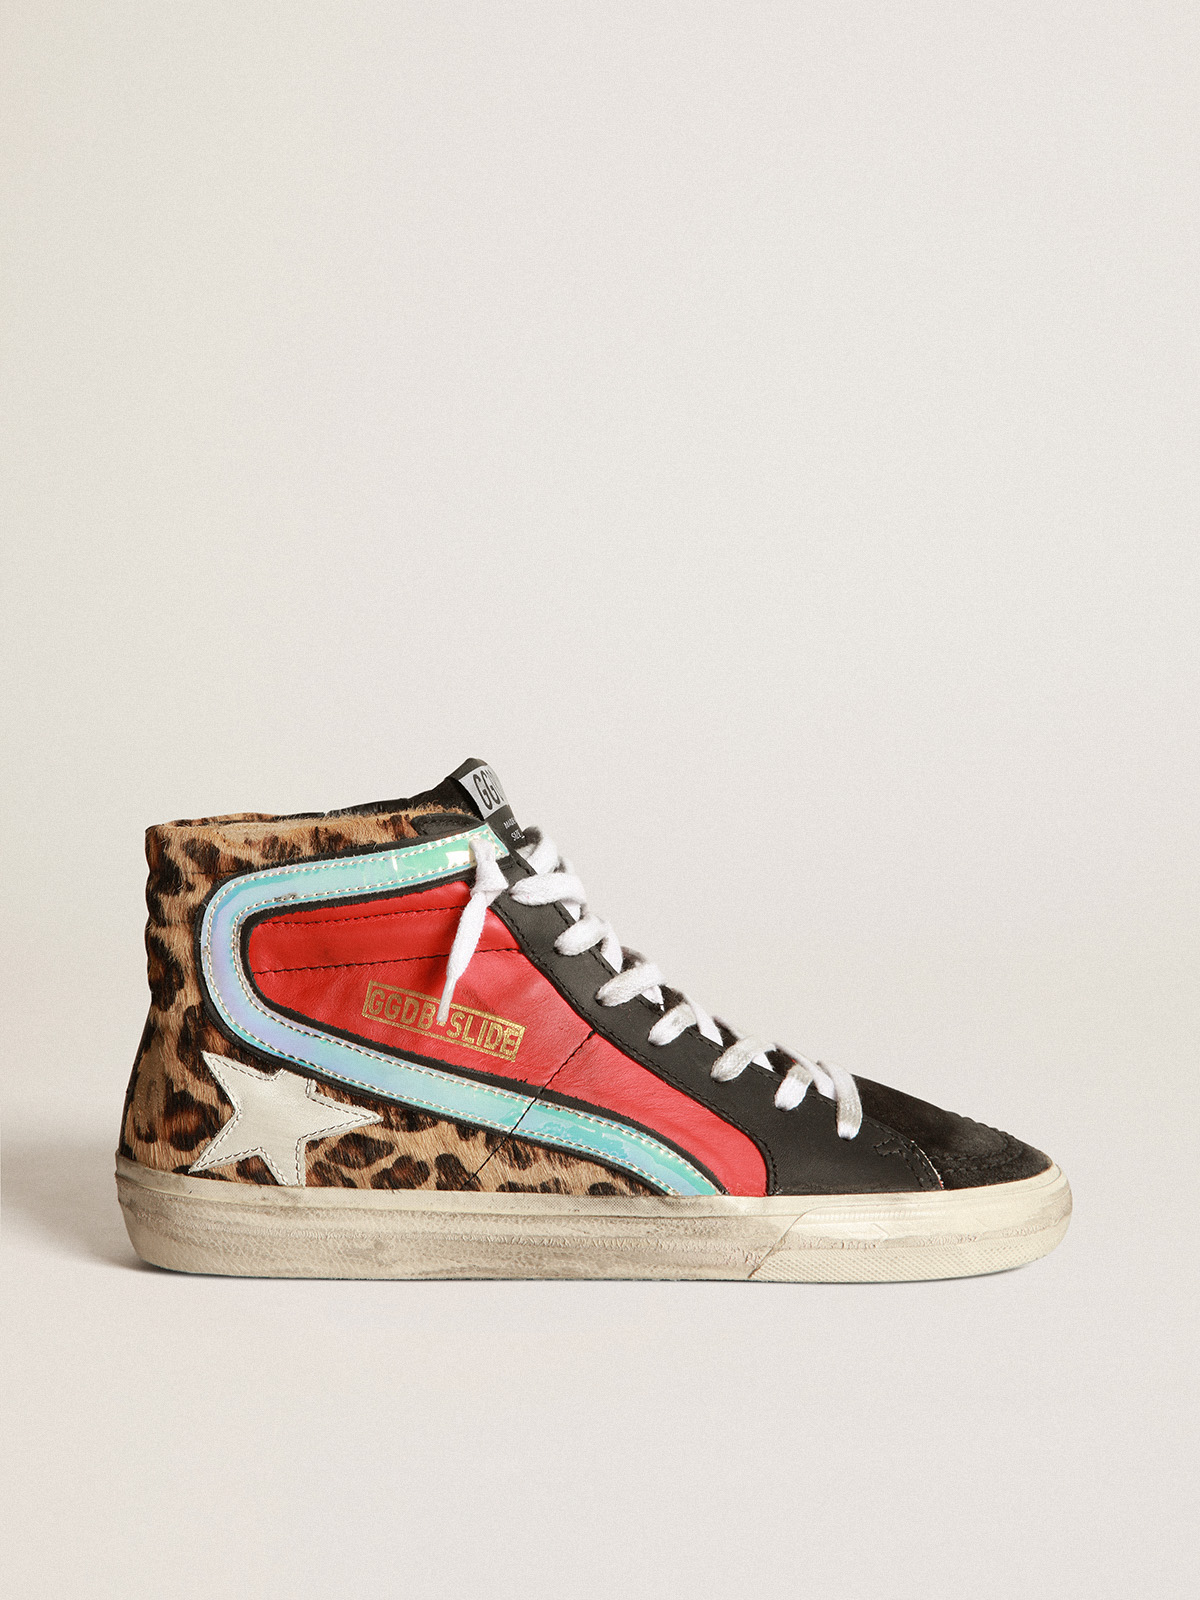 Slide sneakers in red leather and leopard-print pony skin with flash in  iridescent fabric | Golden Goose